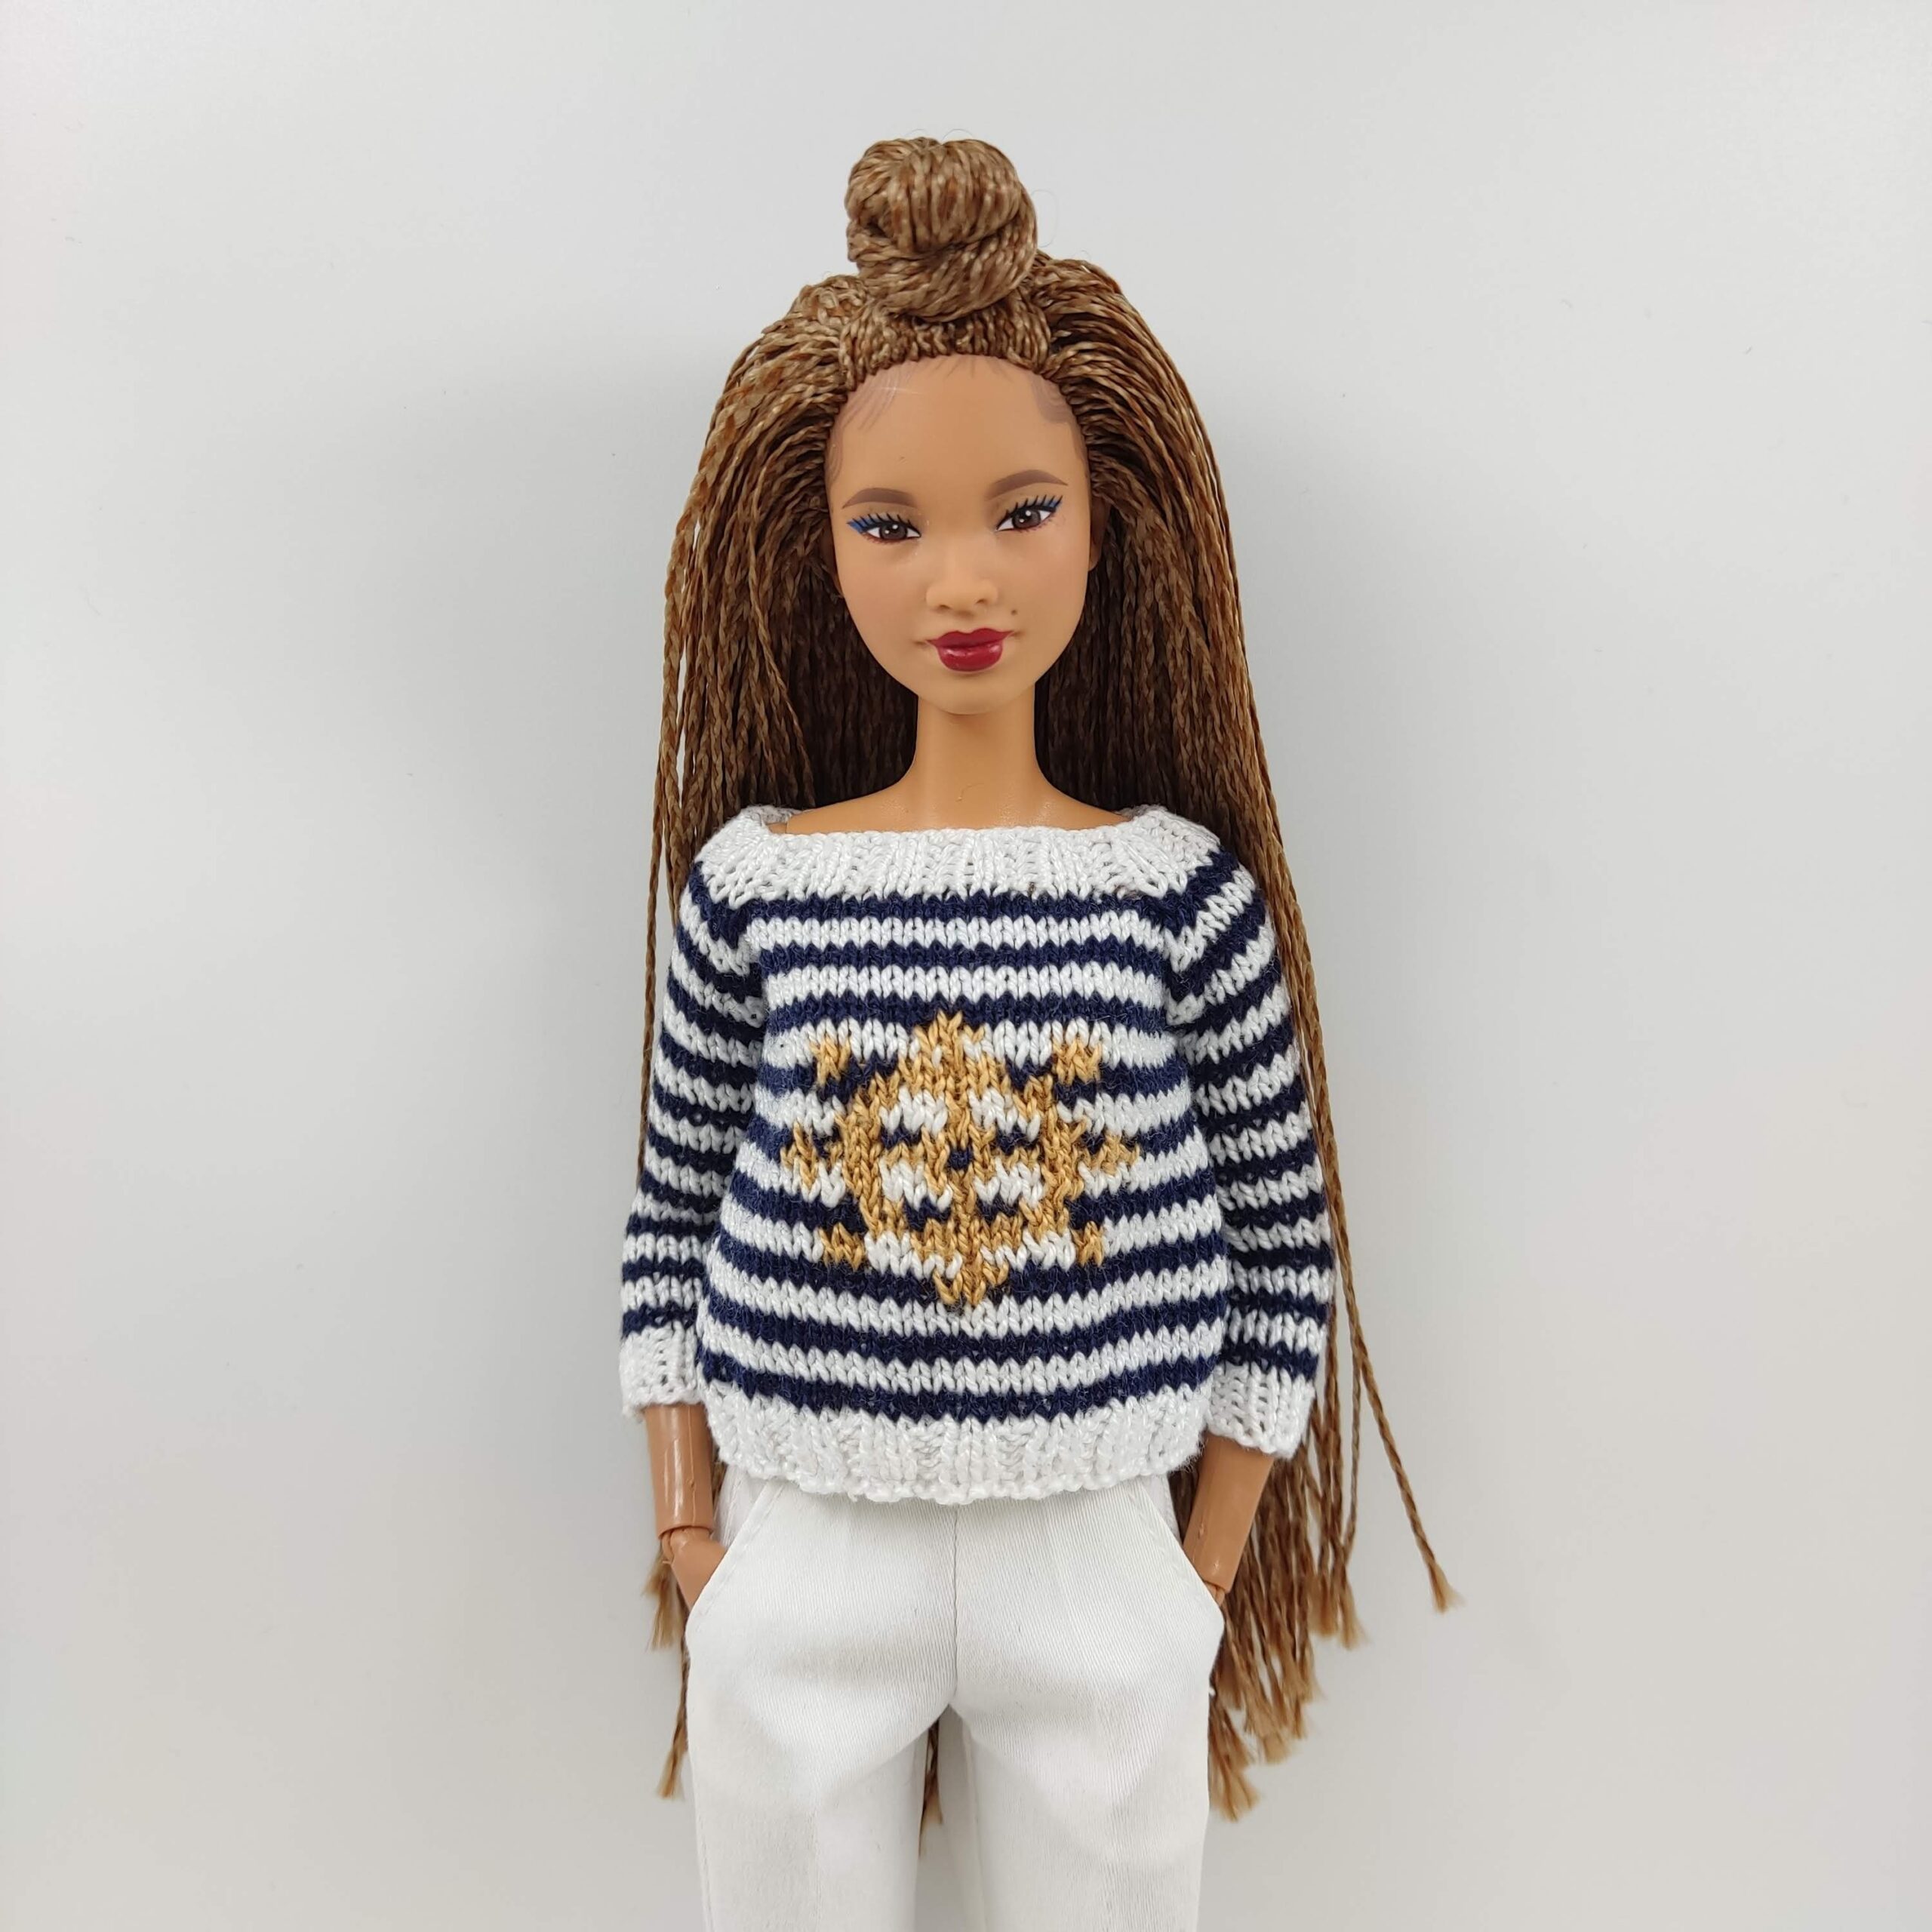 Barbie doll clothes  Butterfly sweater for Barbie doll